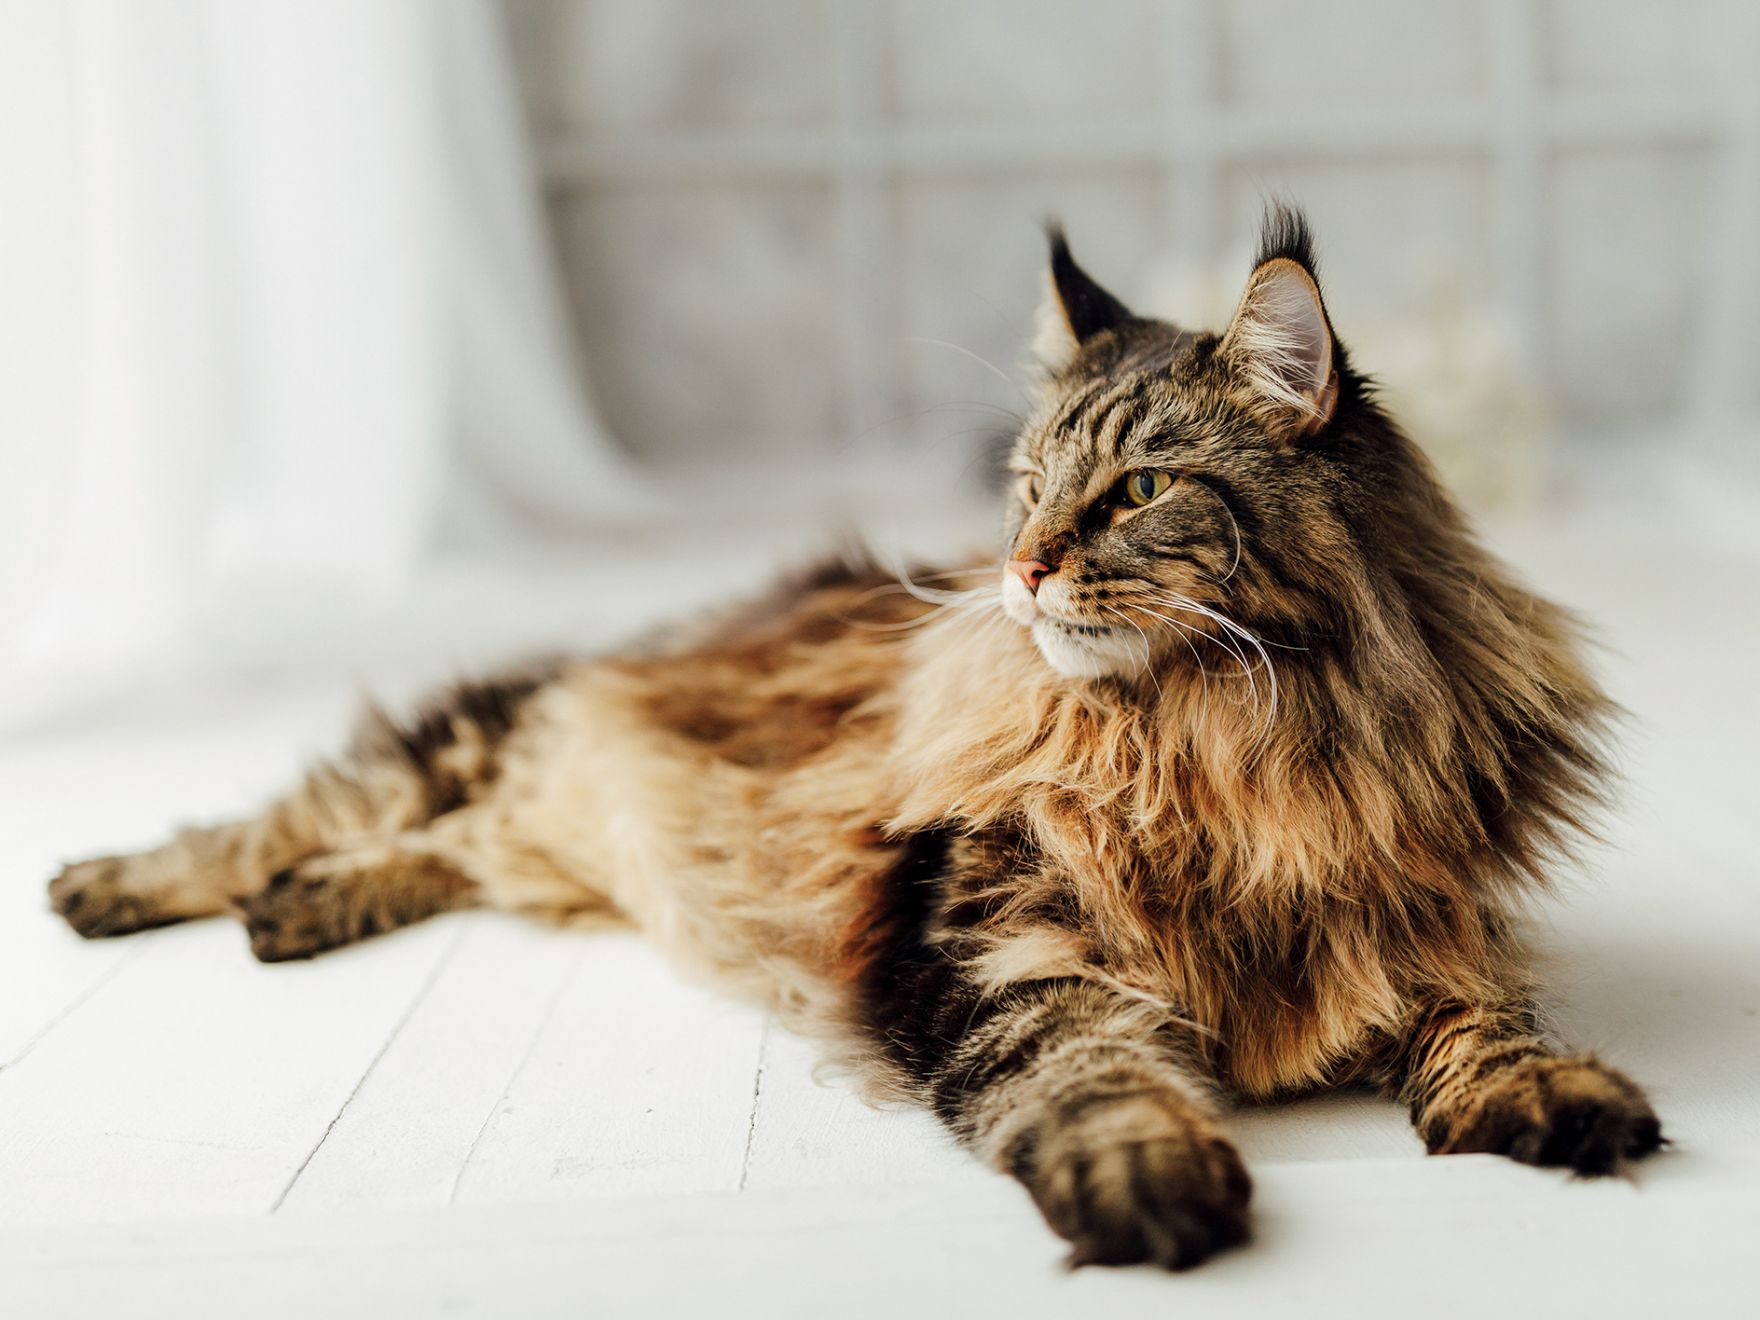 Maine Coon cat lying down on a tiled floor indoors